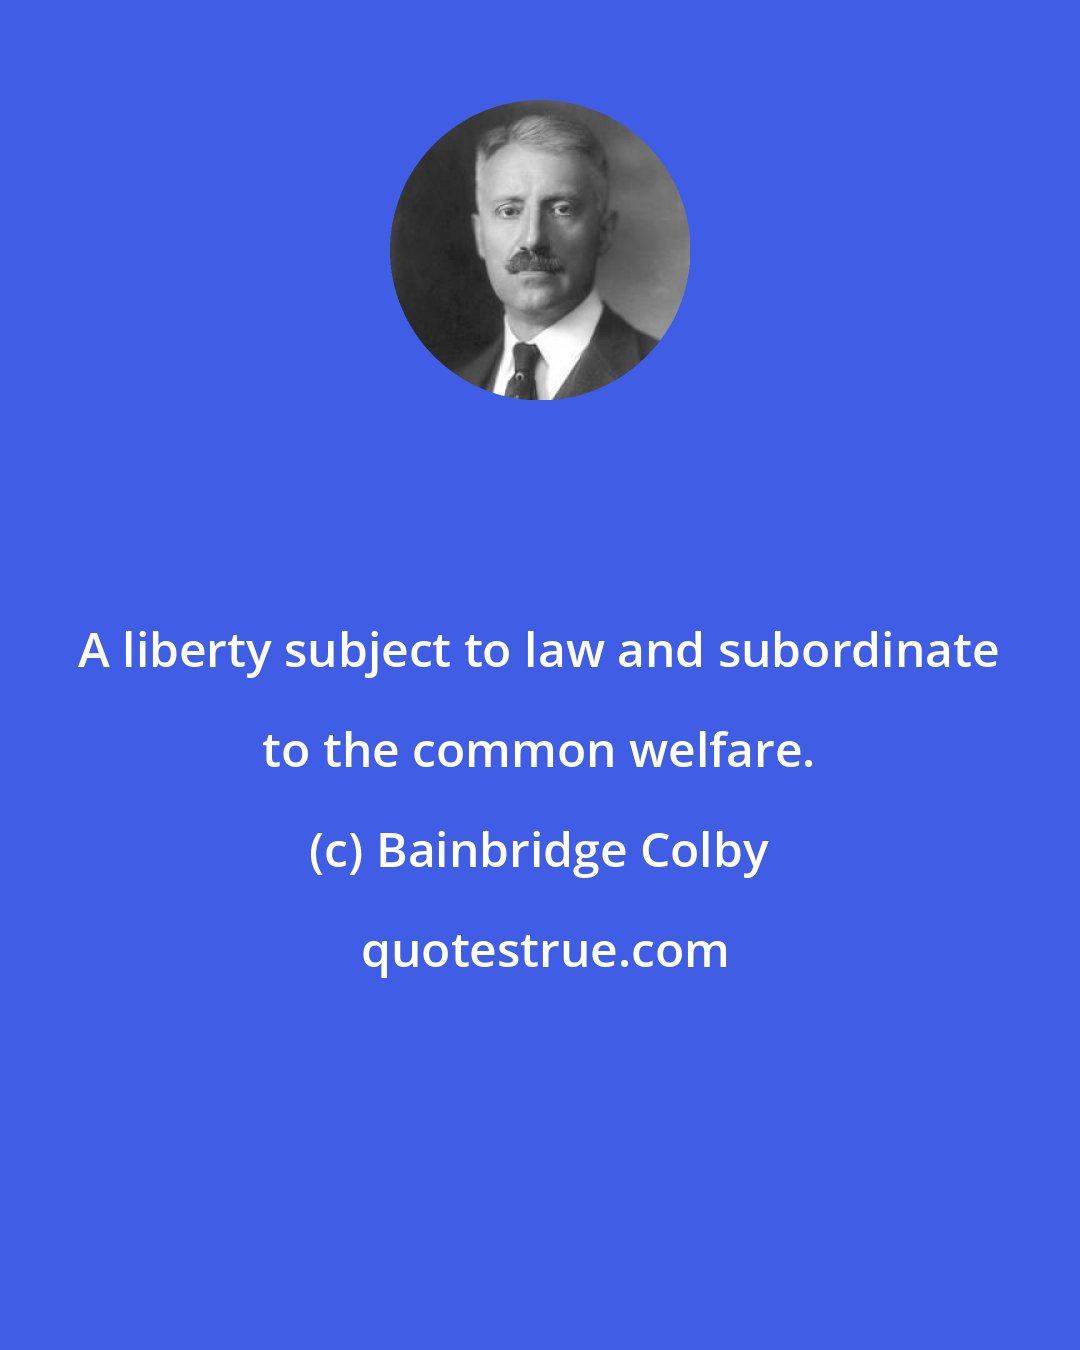 Bainbridge Colby: A liberty subject to law and subordinate to the common welfare.